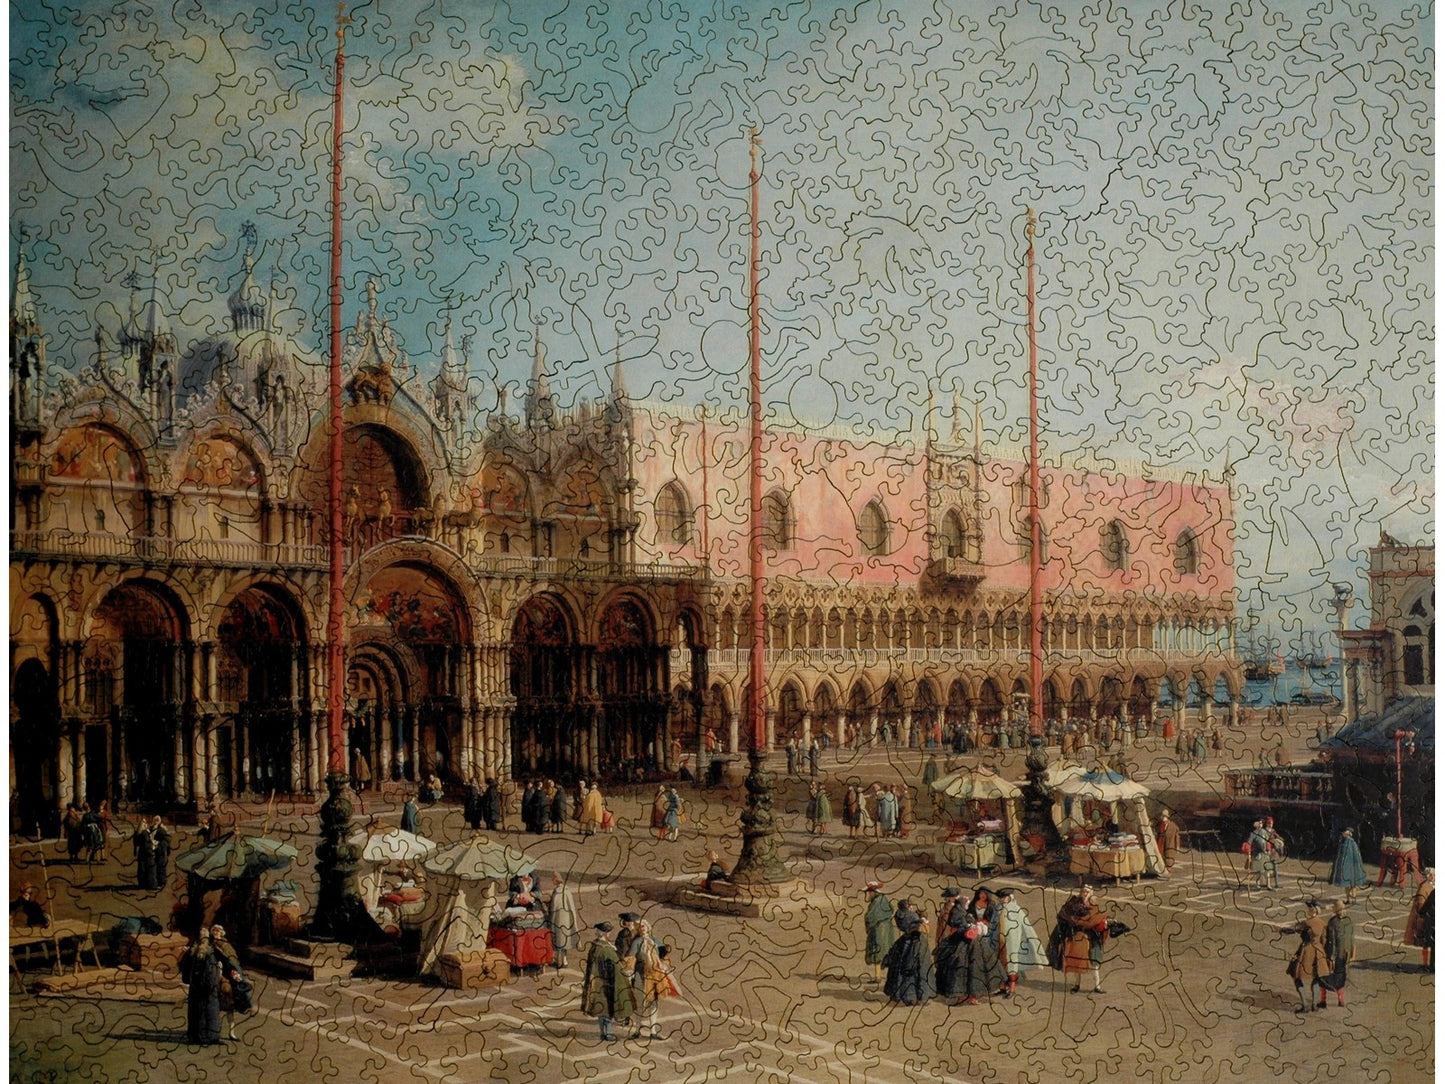 The front of the puzzle, Piazza San Marco, which shows a market square with a church.